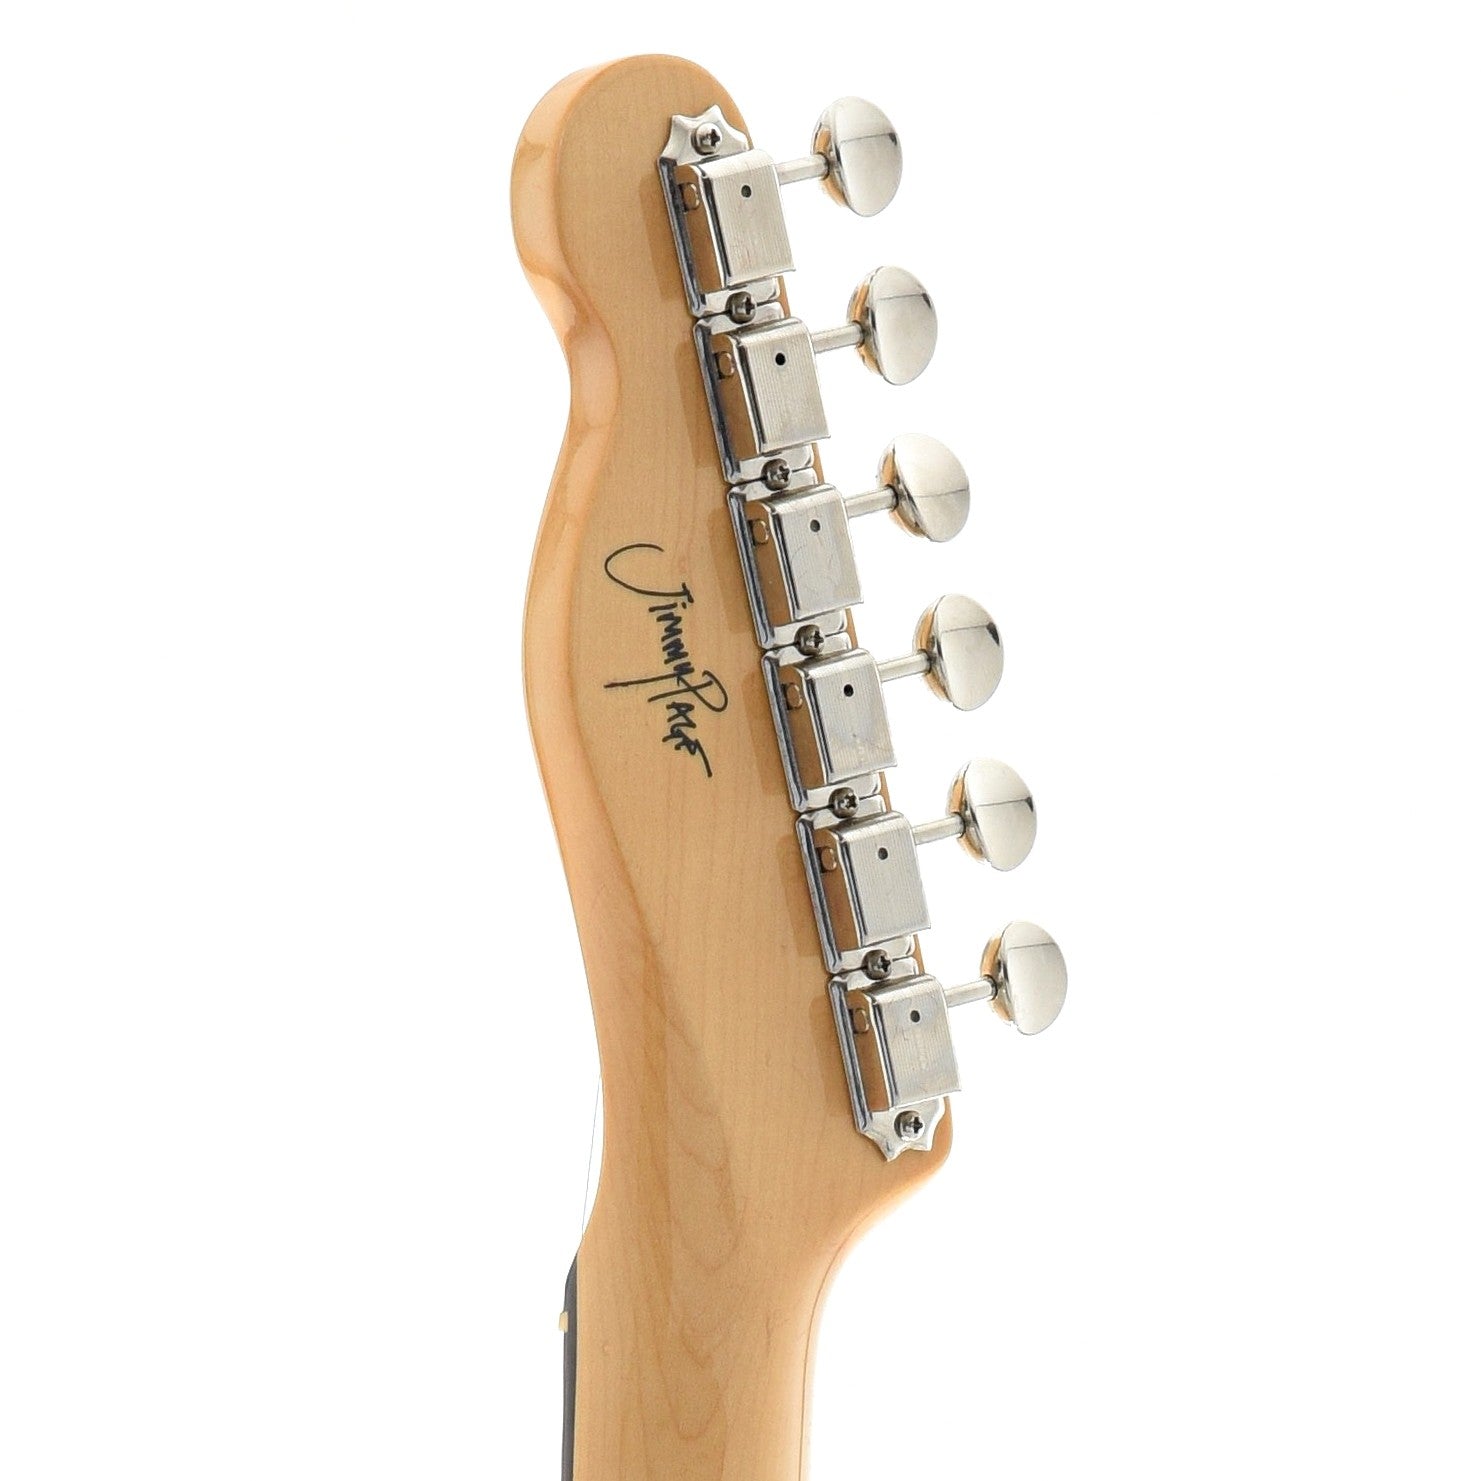 Back headstock of Fender Jimmy Page Mirror Telecaster